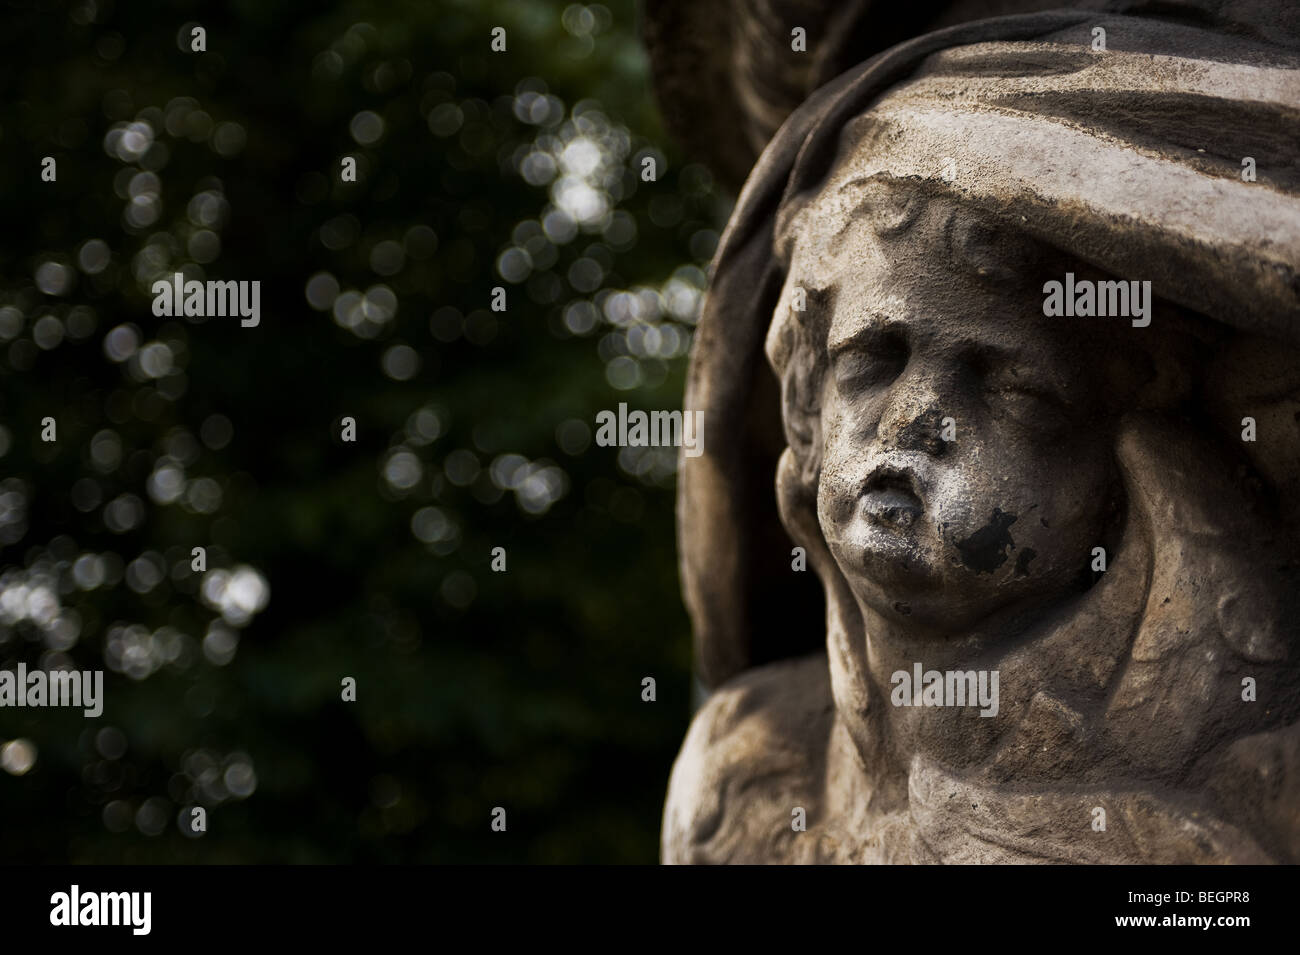 A stone sculpture of a cherub suffering from erosion and pollution damage in London. Stock Photo